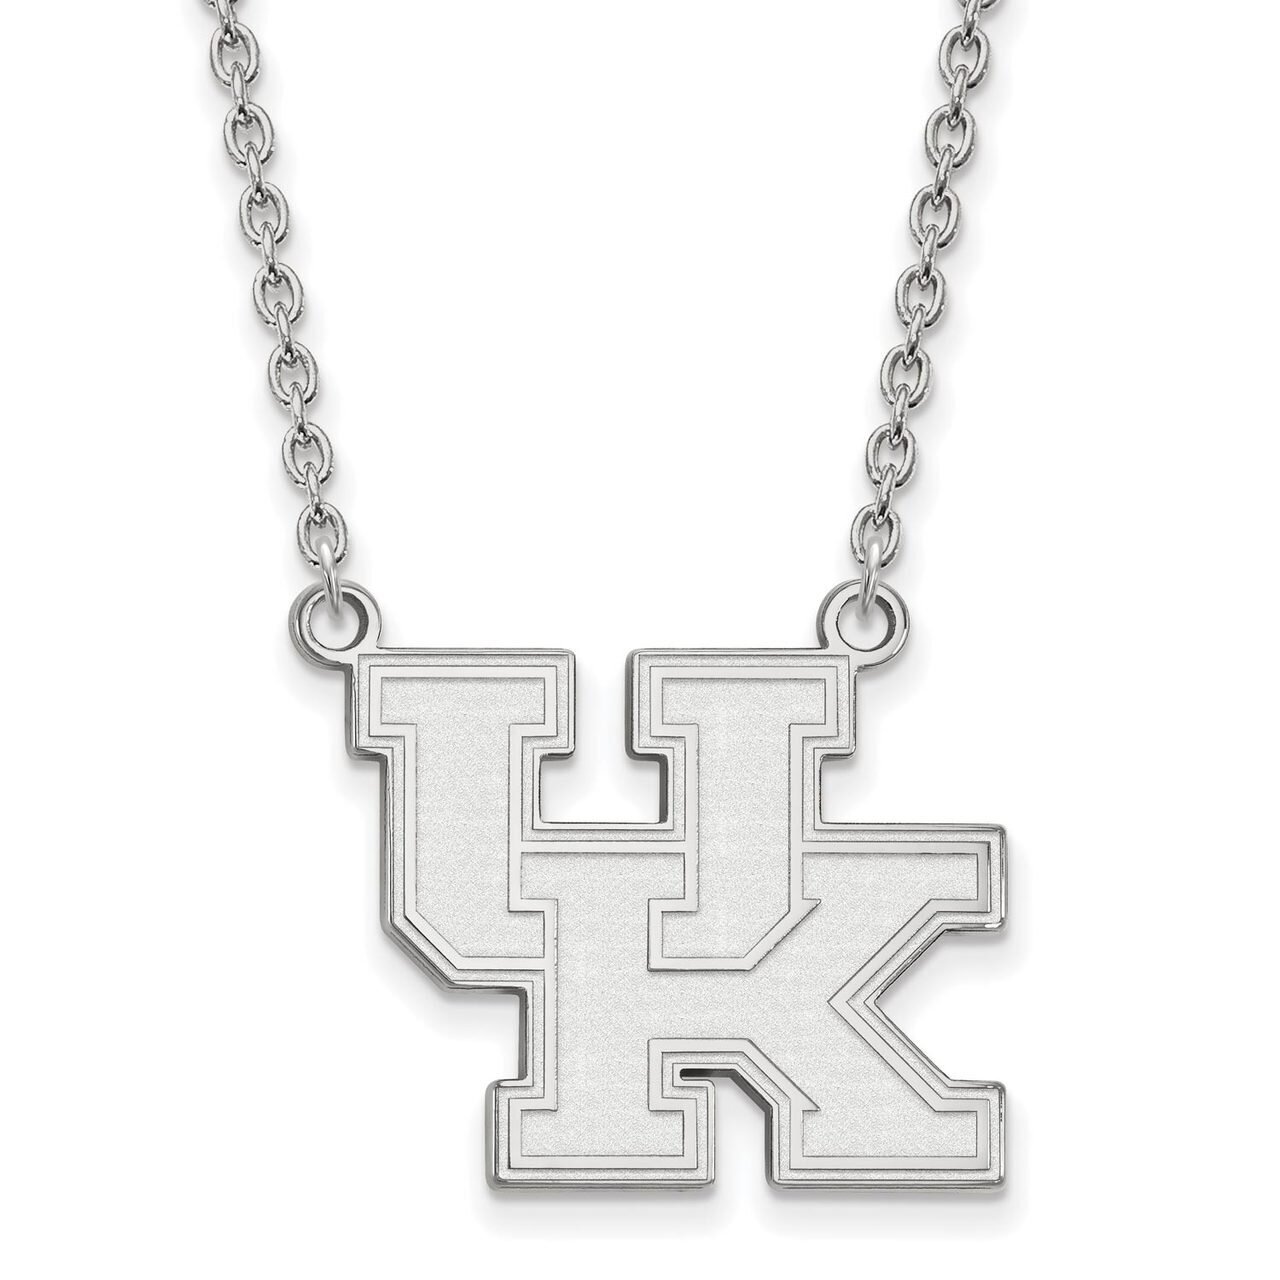 University of Kentucky Large Pendant with Chain Necklace 14k White Gold 4W016UK-18